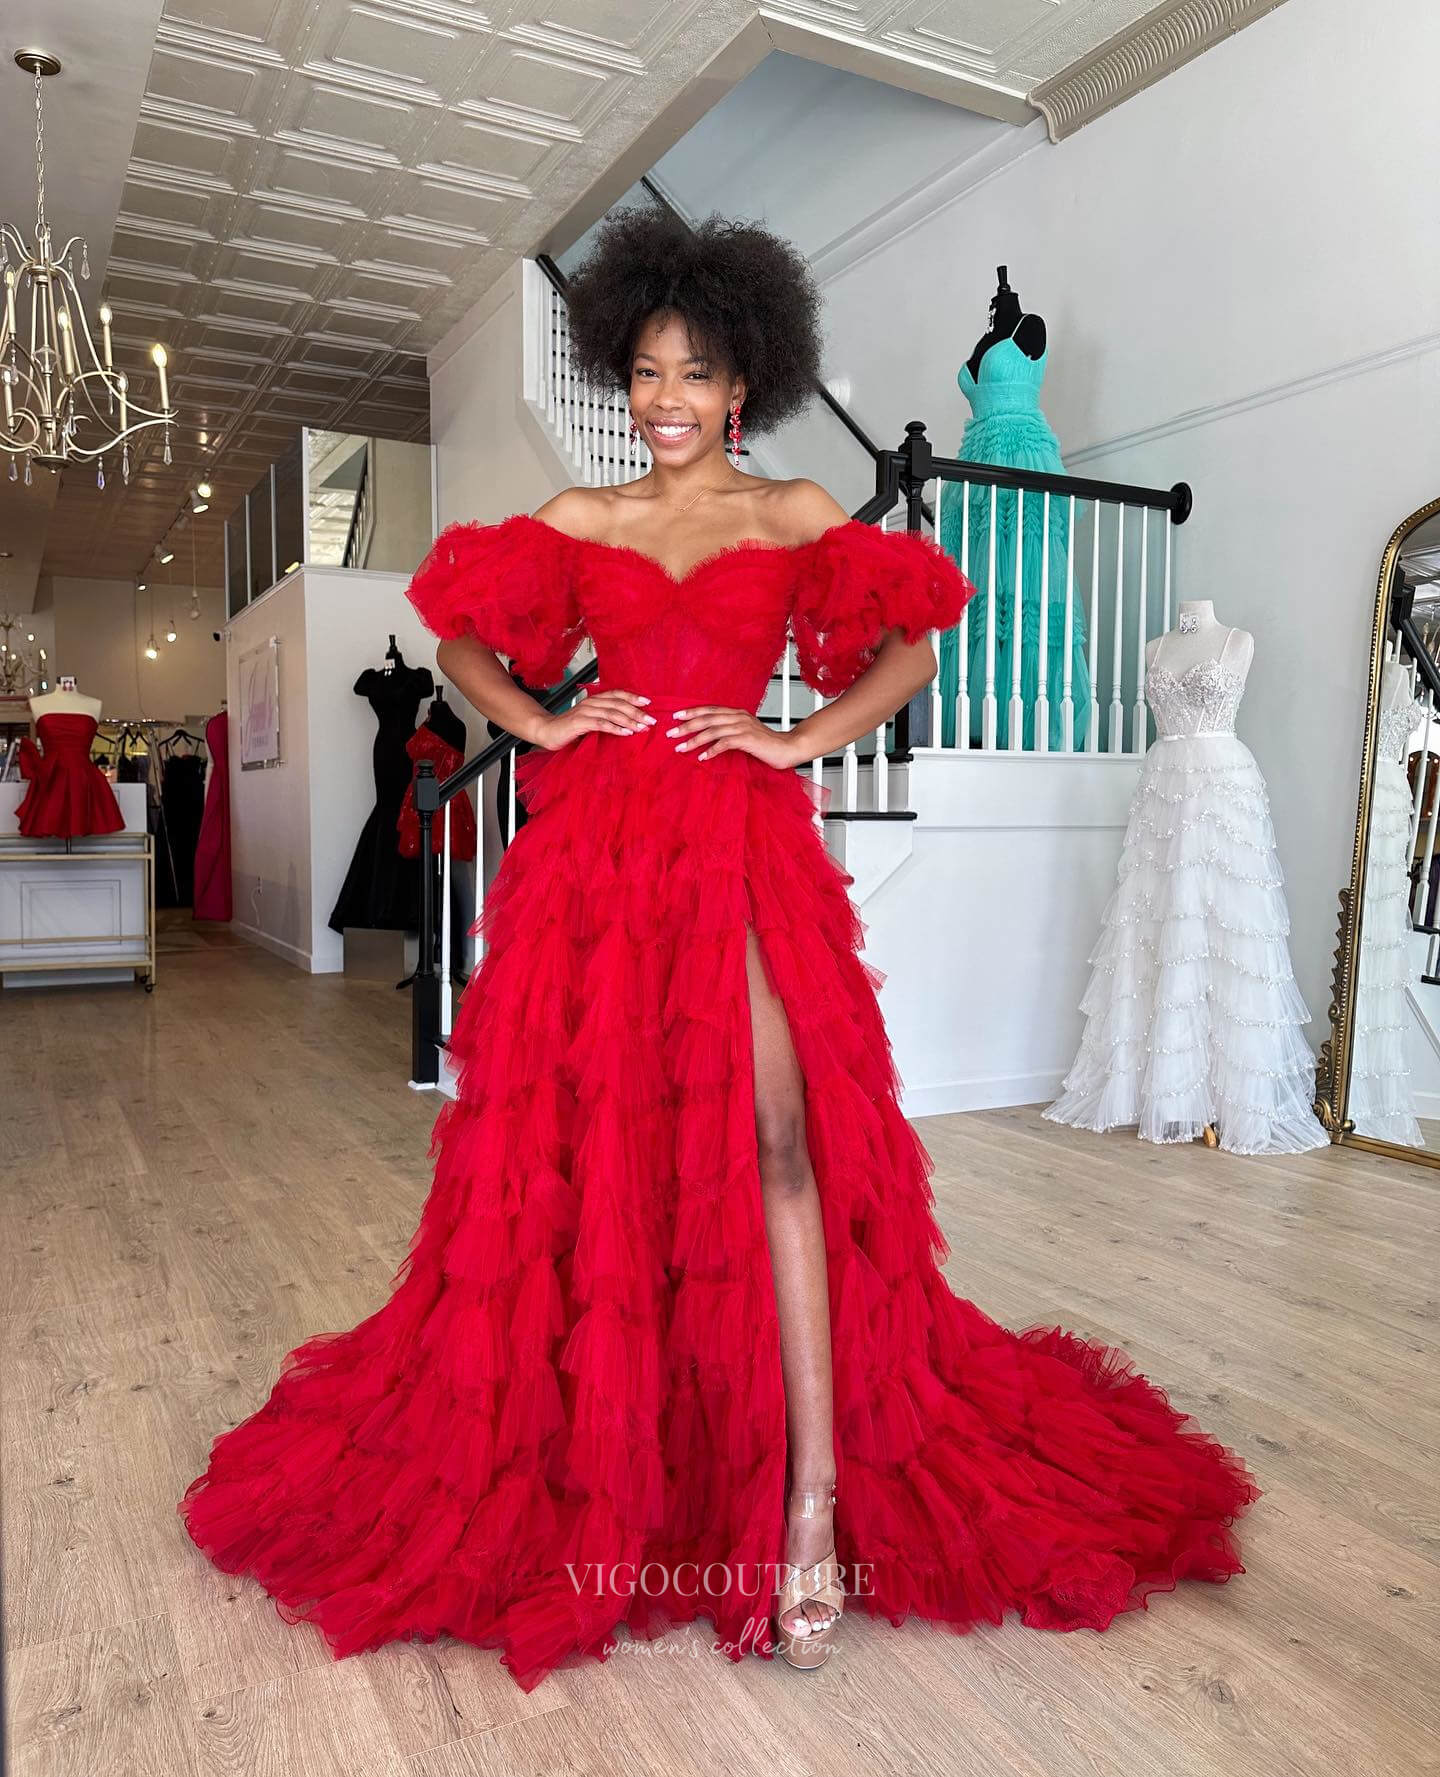 Simple Off Shoulder Red Formal Party Dress With Bows - $162.0905 #S21021 -  SheProm.com